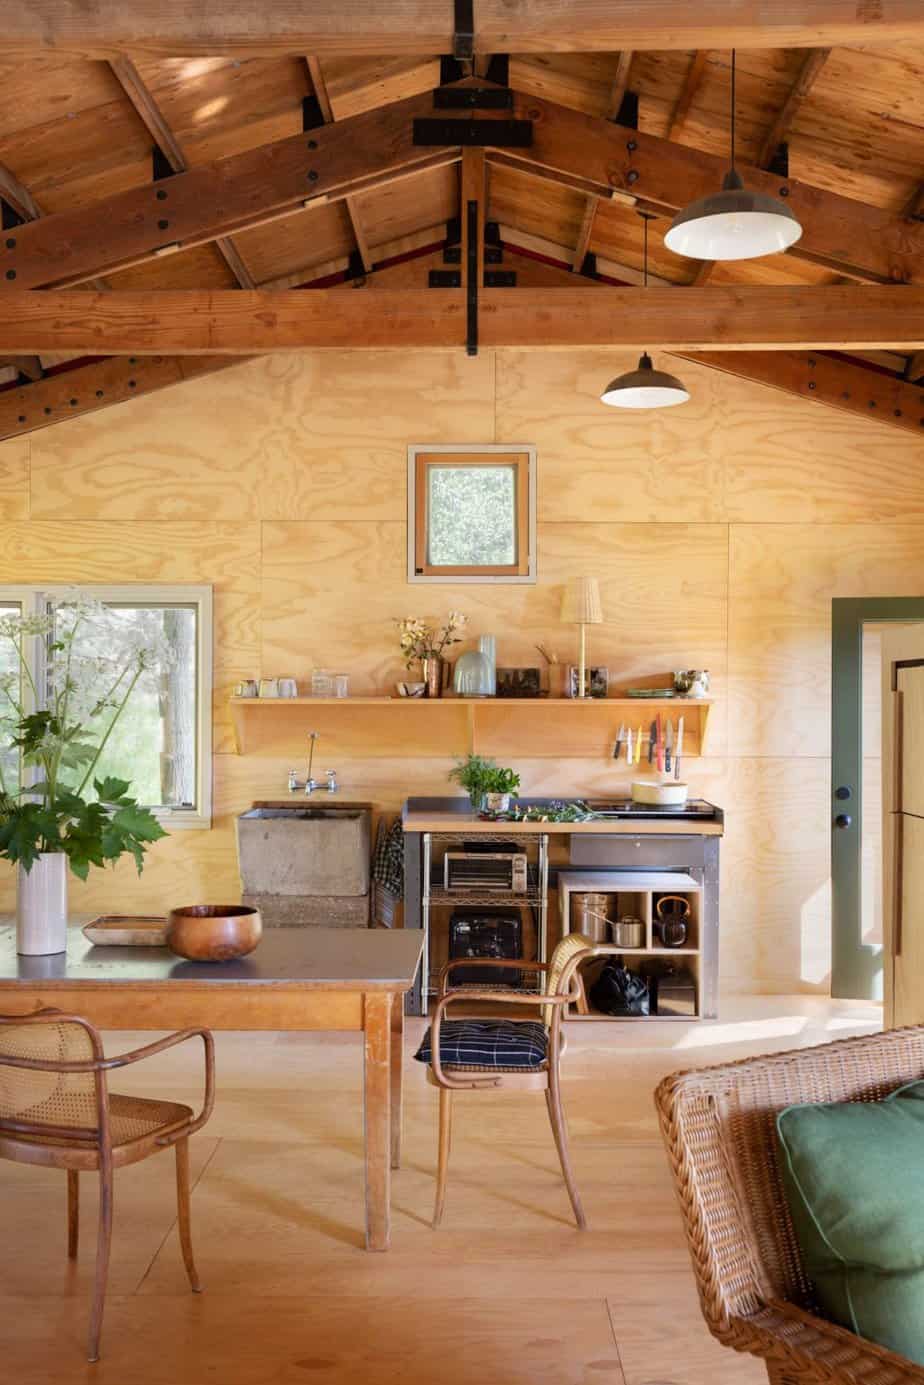 Rustic shed interior, high ceiling and fully furnished